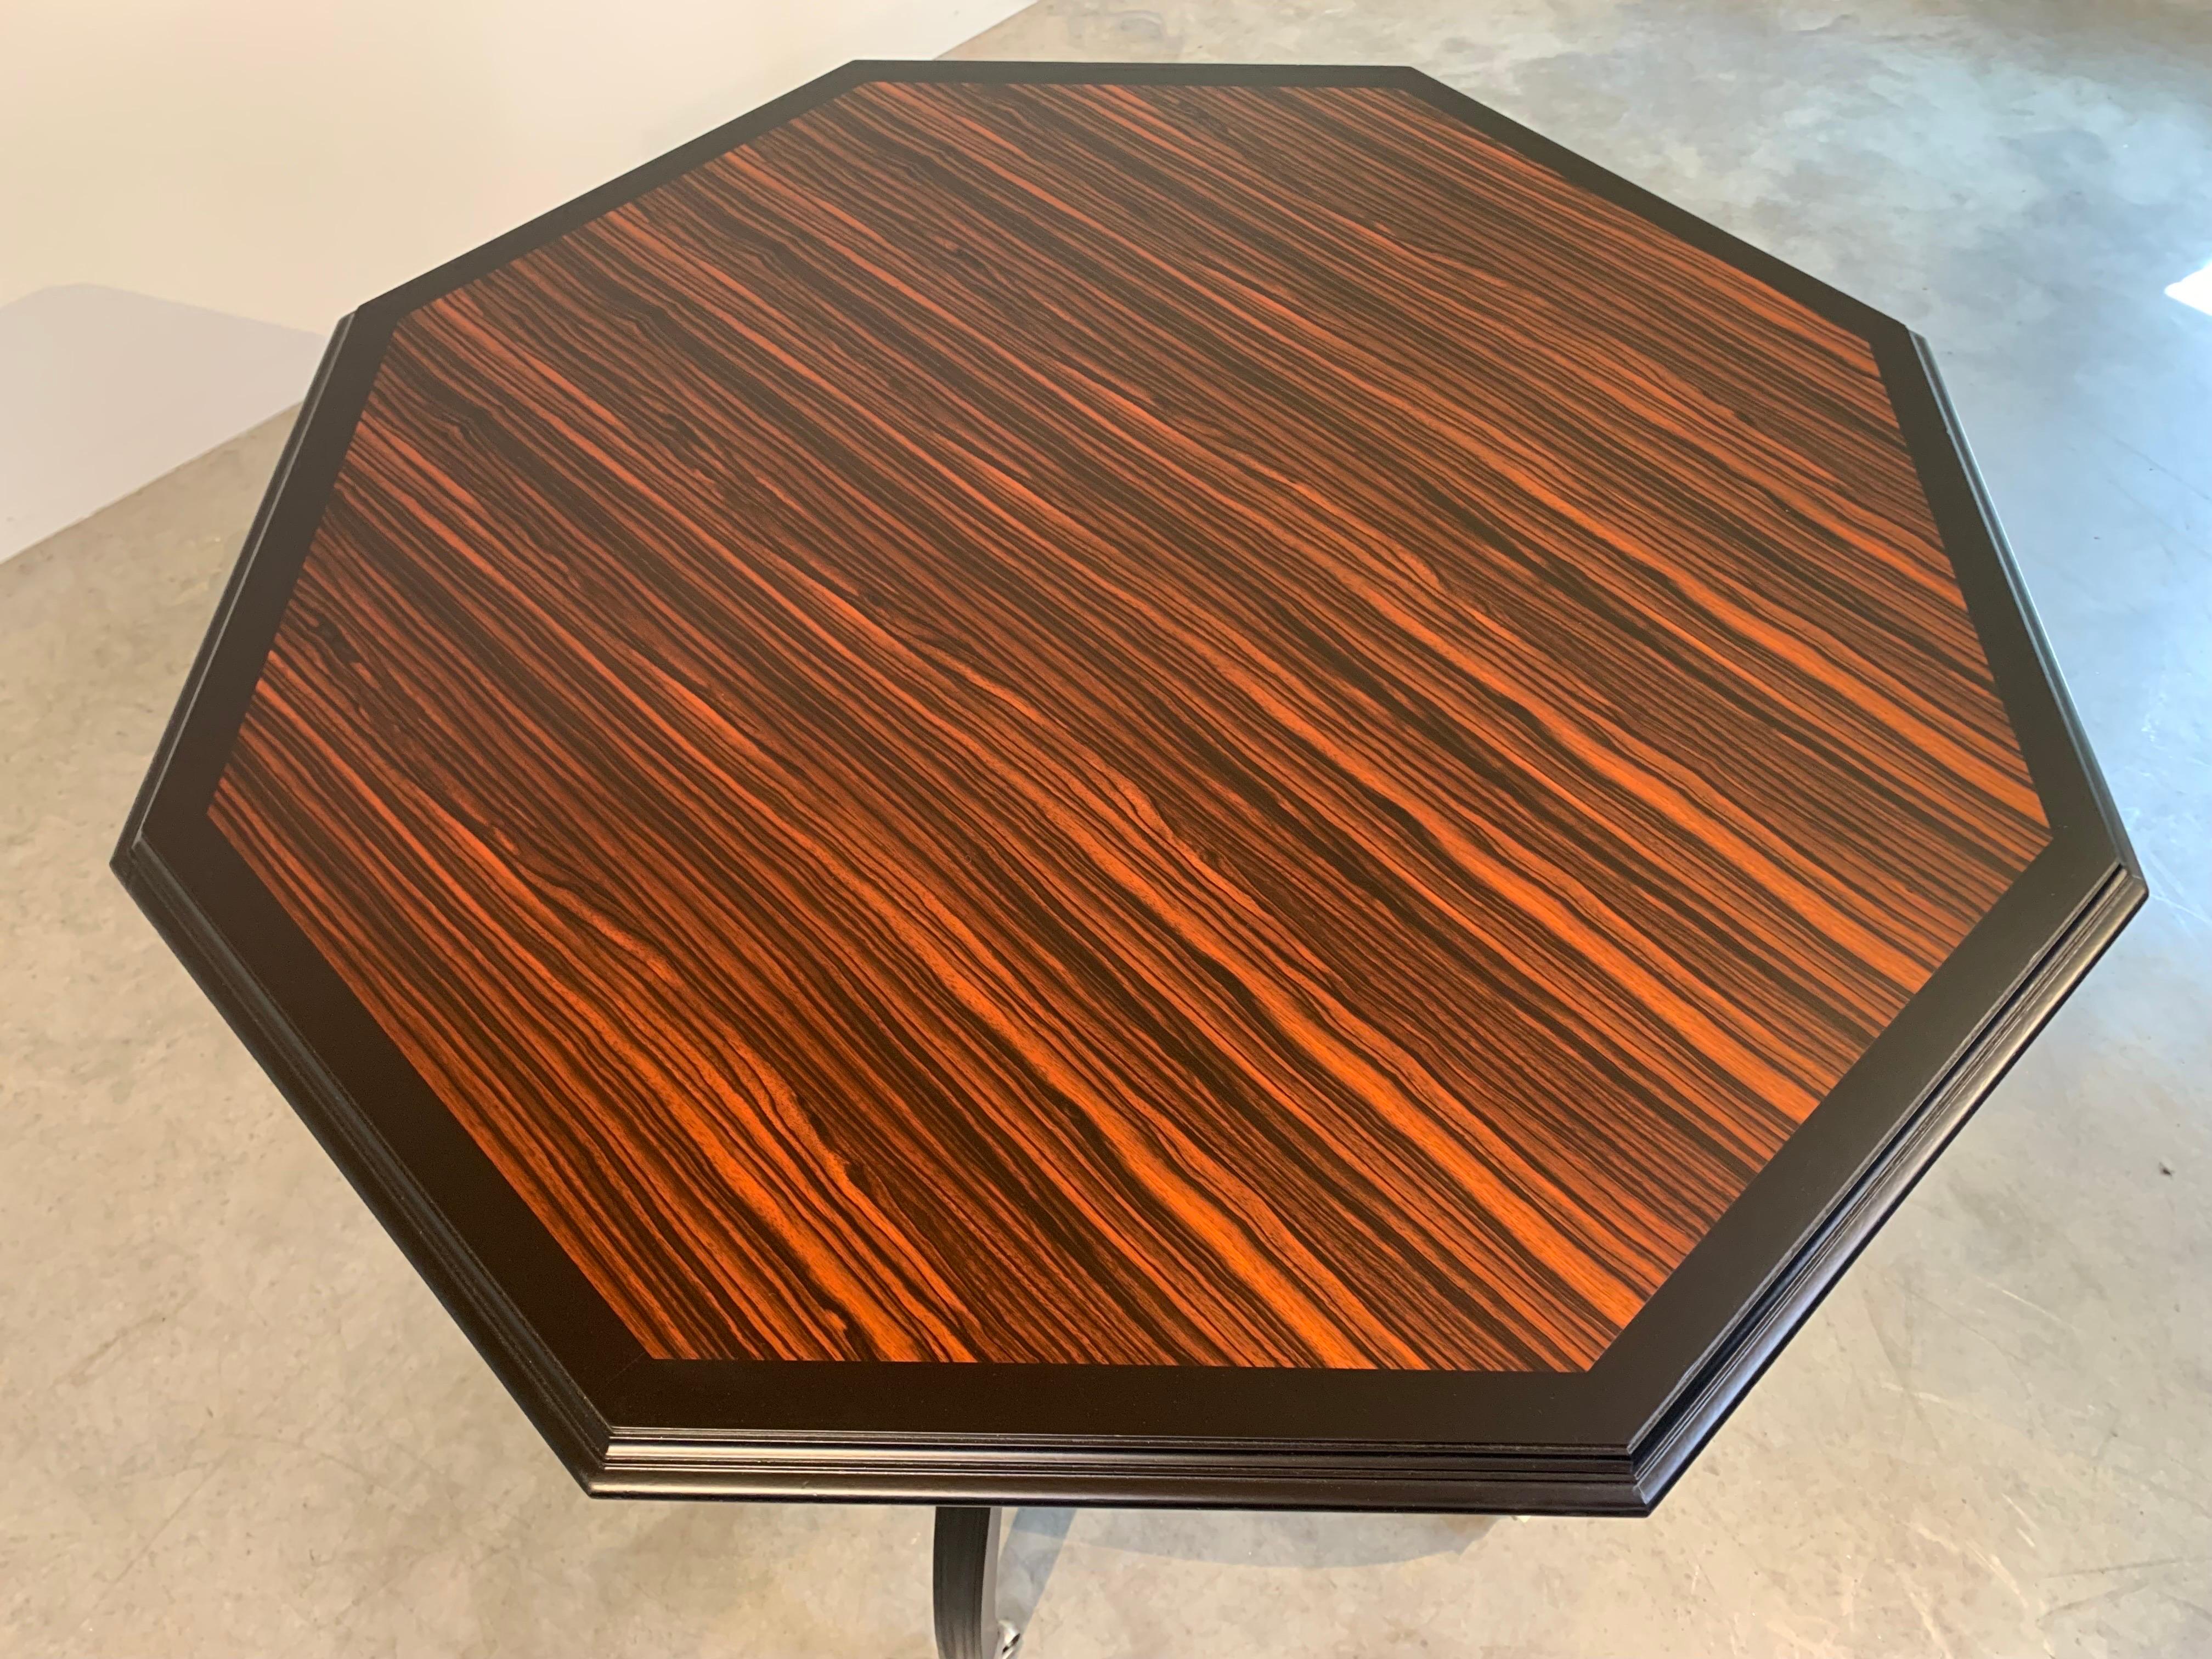 A beautiful multi-use octagonal table having Macassar ebony top with hand carved spiral center and curved legs over brushed nickel casters manufactured by Hickory Chair Company. 
In outstanding condition. Measures: 31x39x39” HWD.